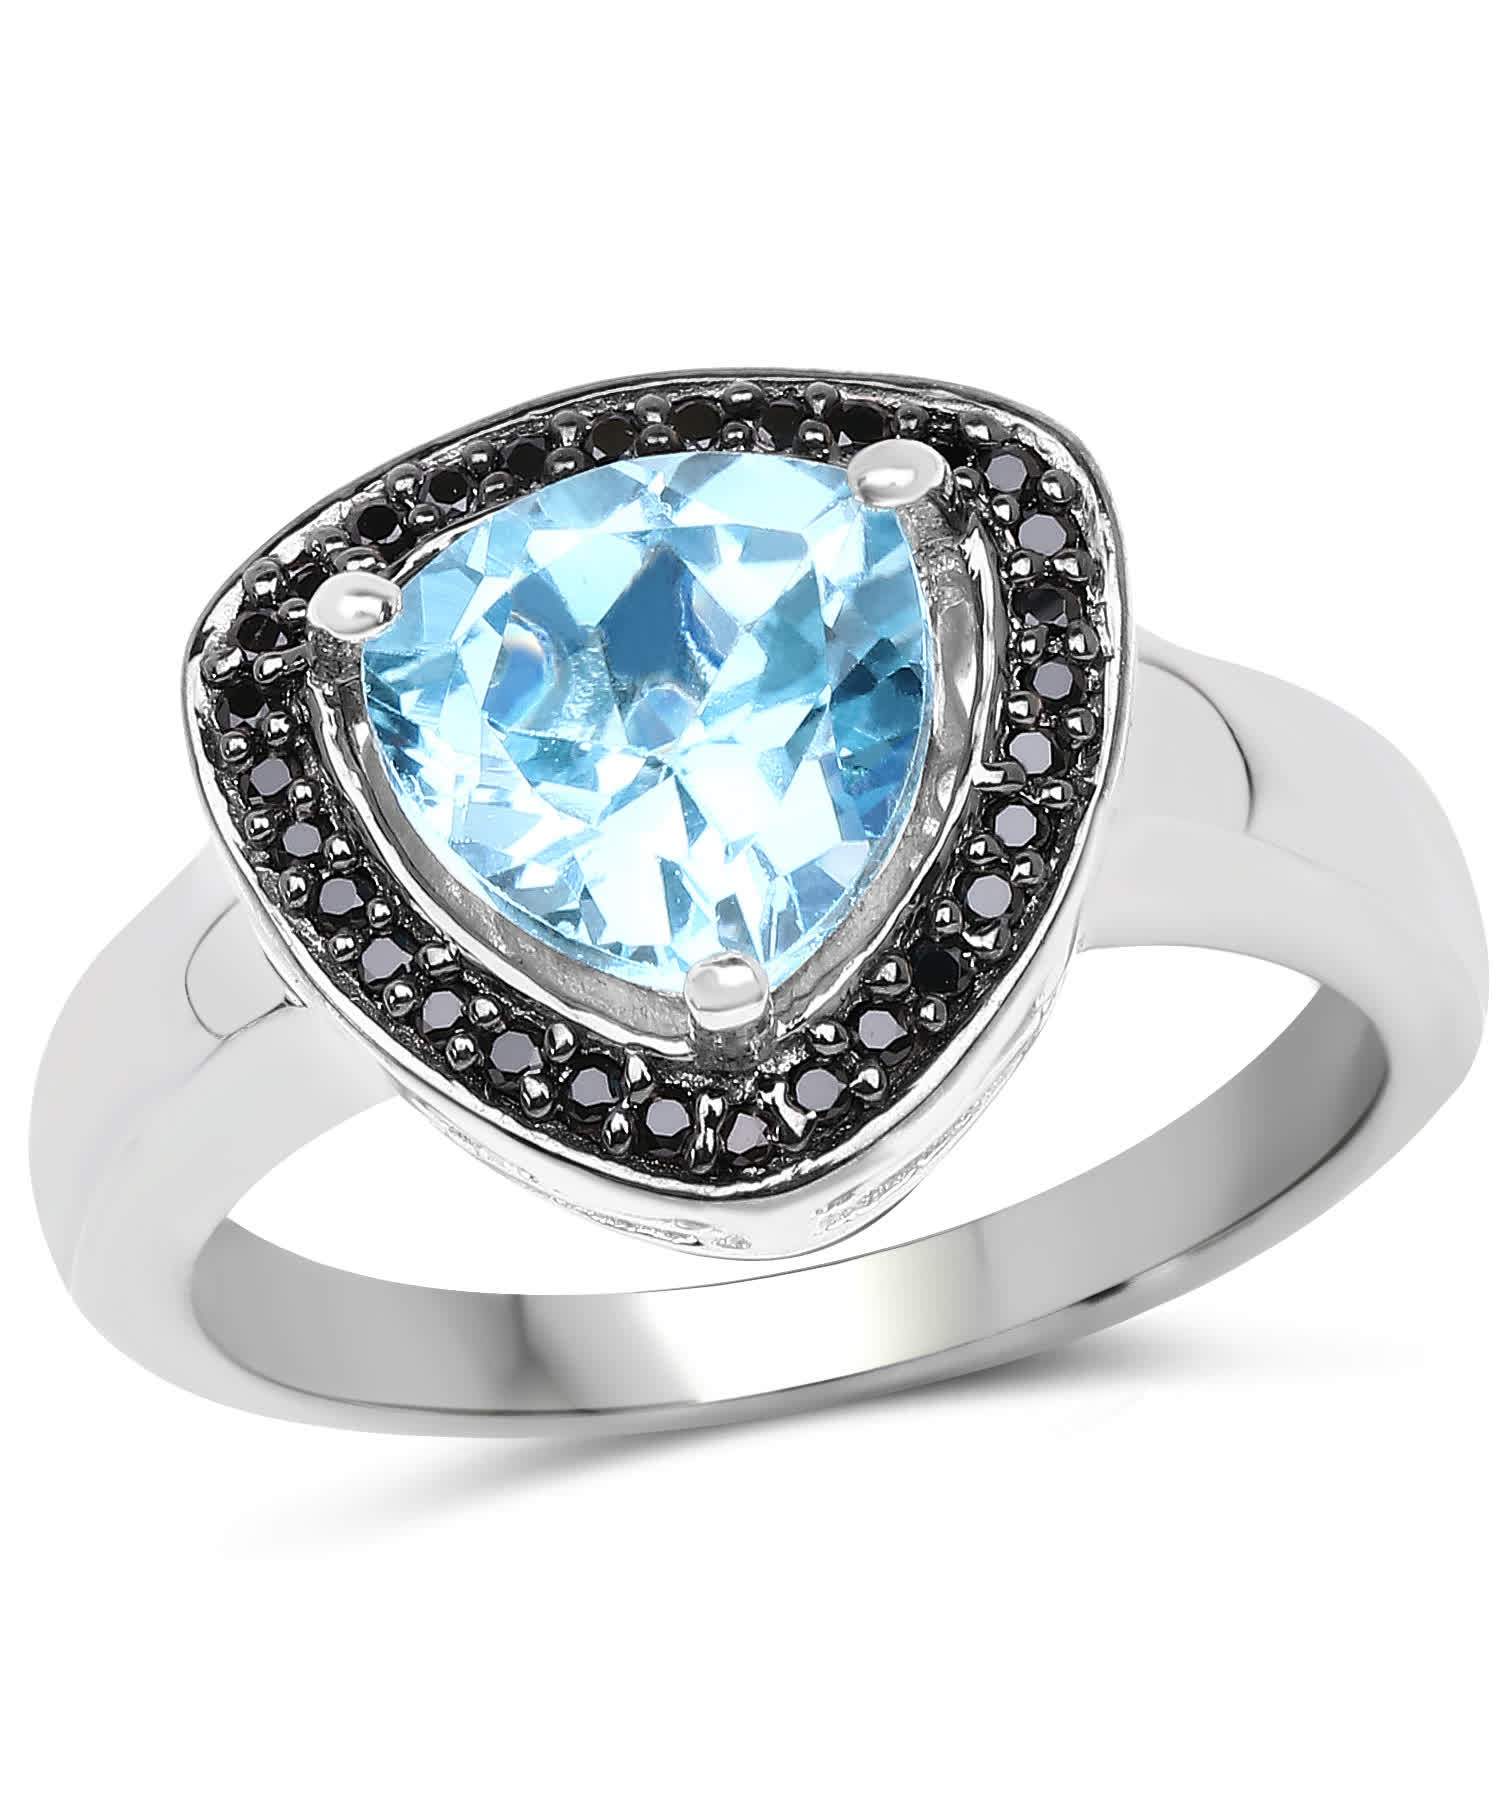 2.06ctw Natural Swiss Blue Topaz and Black Diamond Rhodium Plated 925 Sterling Silver Triangle Ring View 1